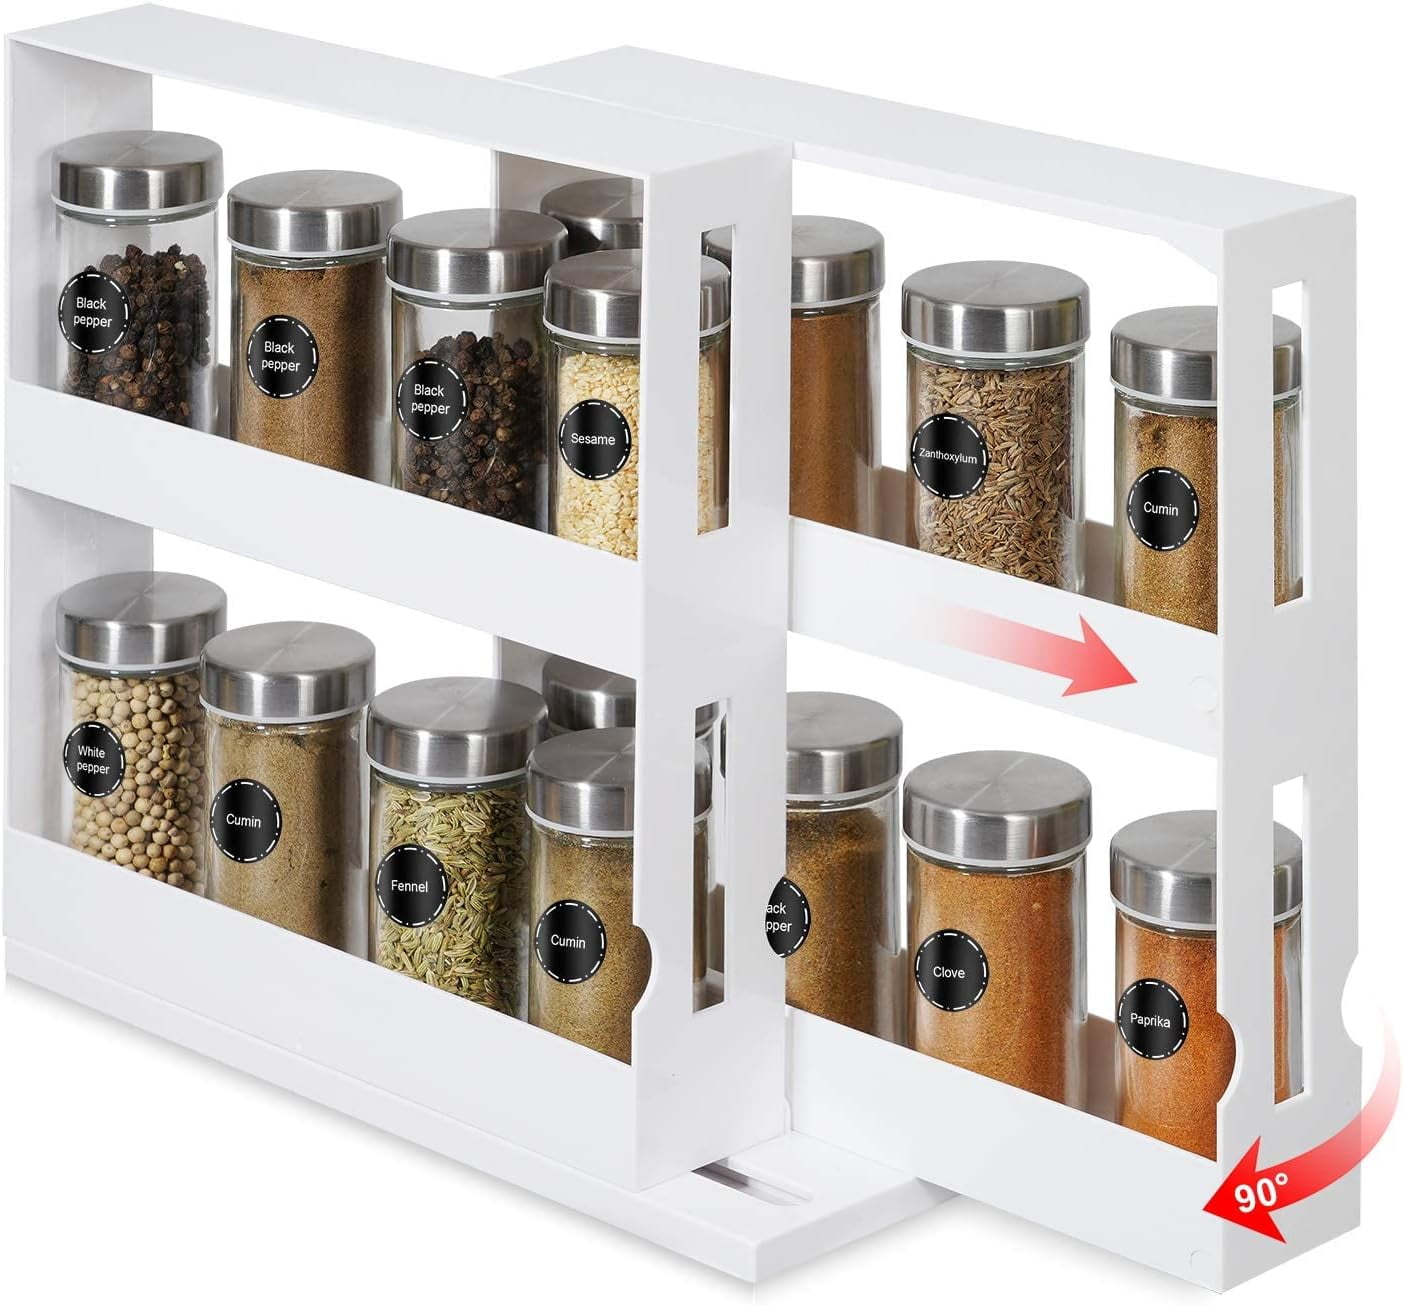 FDWYTY Spice Rack Organizer, Pull & Rotate Cabinet Shelf with 2  Double-Decker Shelves | Non-Skid Base, Organization and Storage for  Seasoning Jars